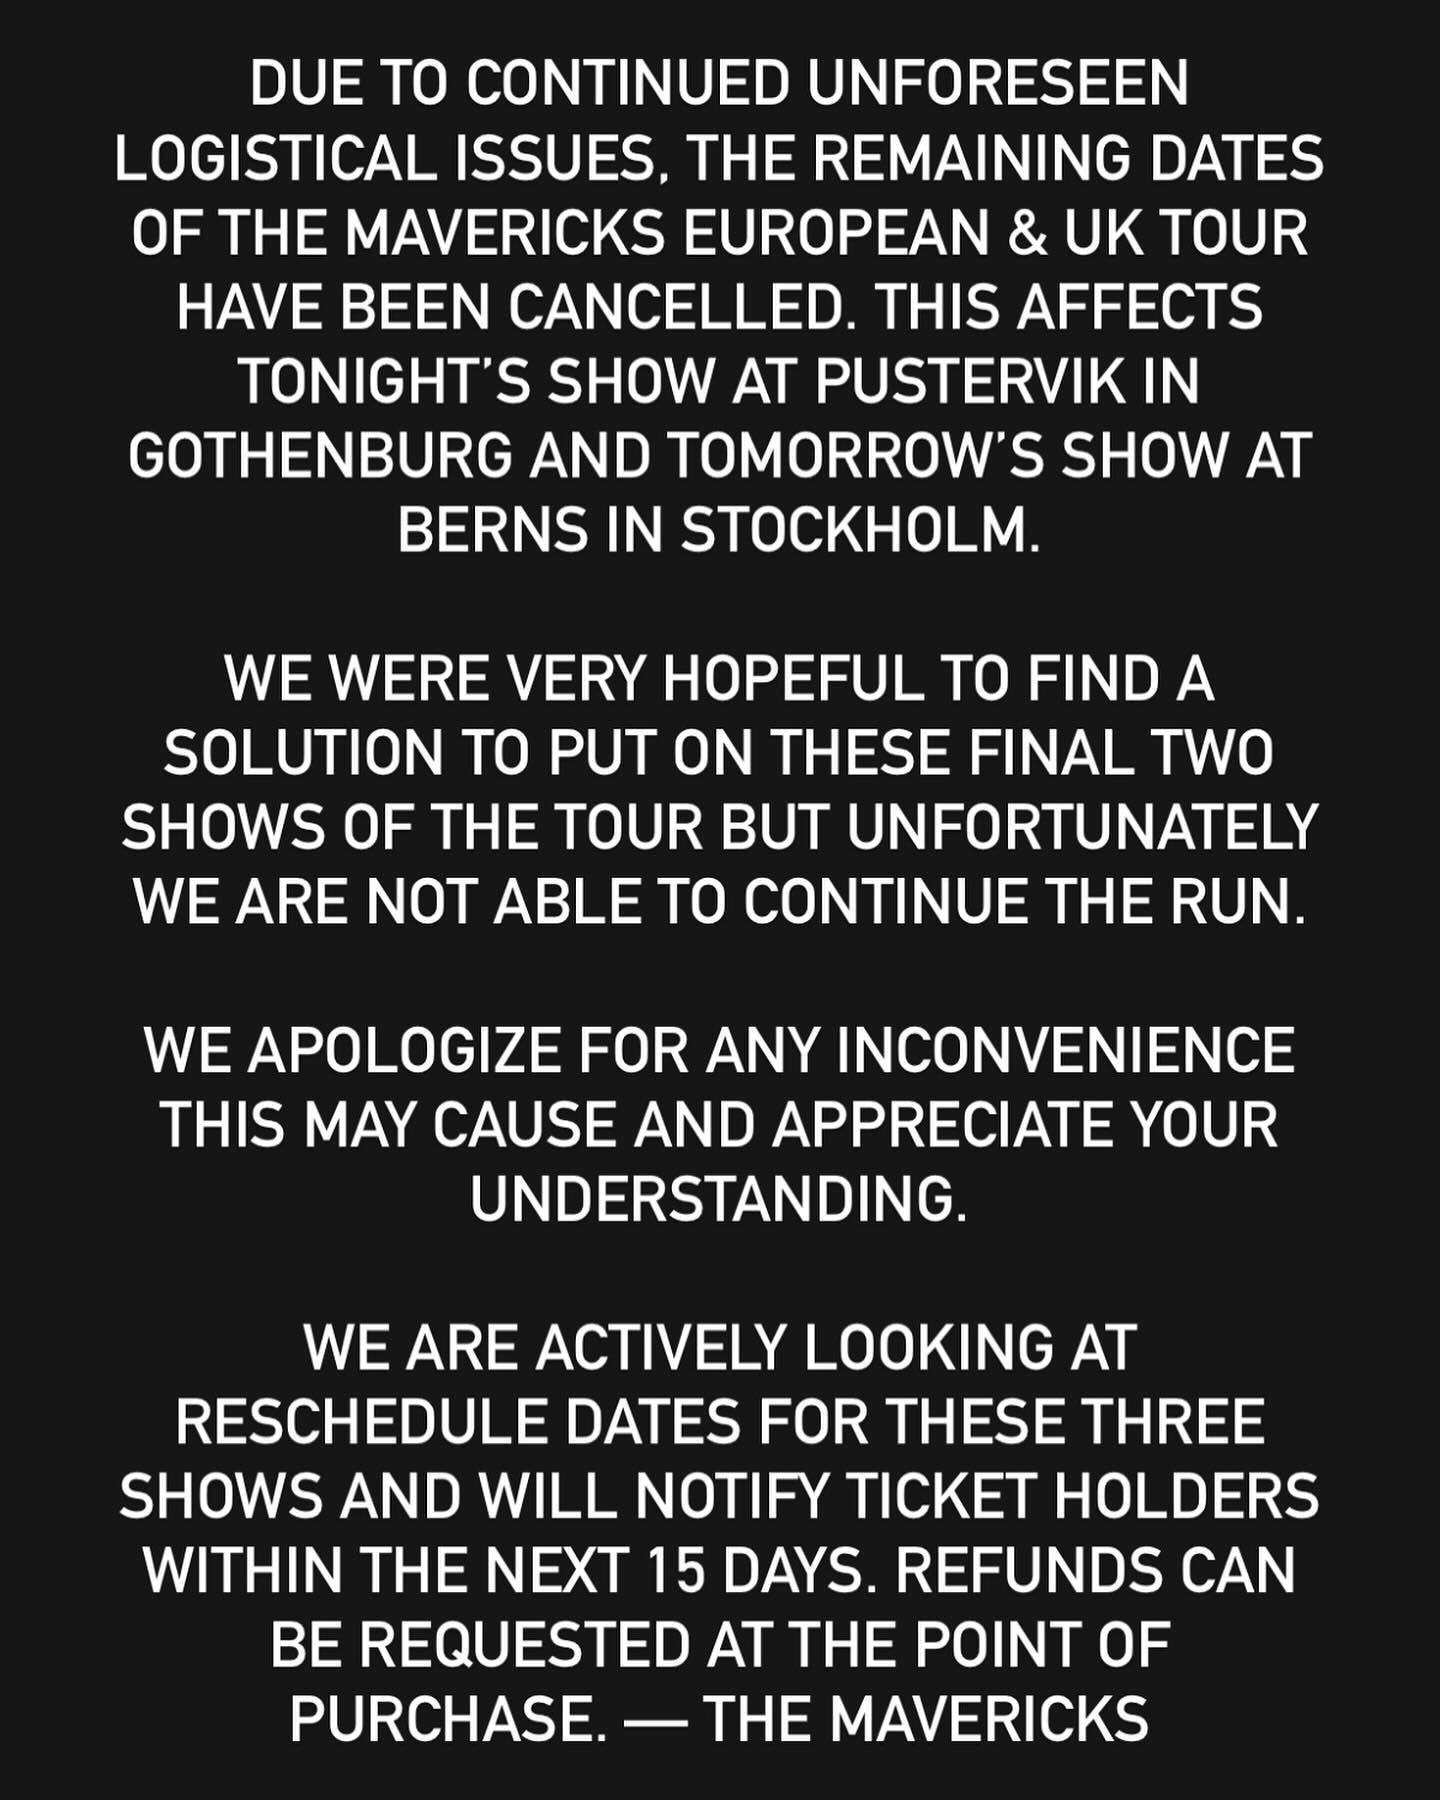 Due to continued unforeseen logistical issues, the remaining dates of The Mavericks European &amp; UK tour have been cancelled. This affects tonight&rsquo;s show at Pustervik in Gothenburg and tomorrow&rsquo;s show at Berns in Stockholm.
&nbsp;
We we